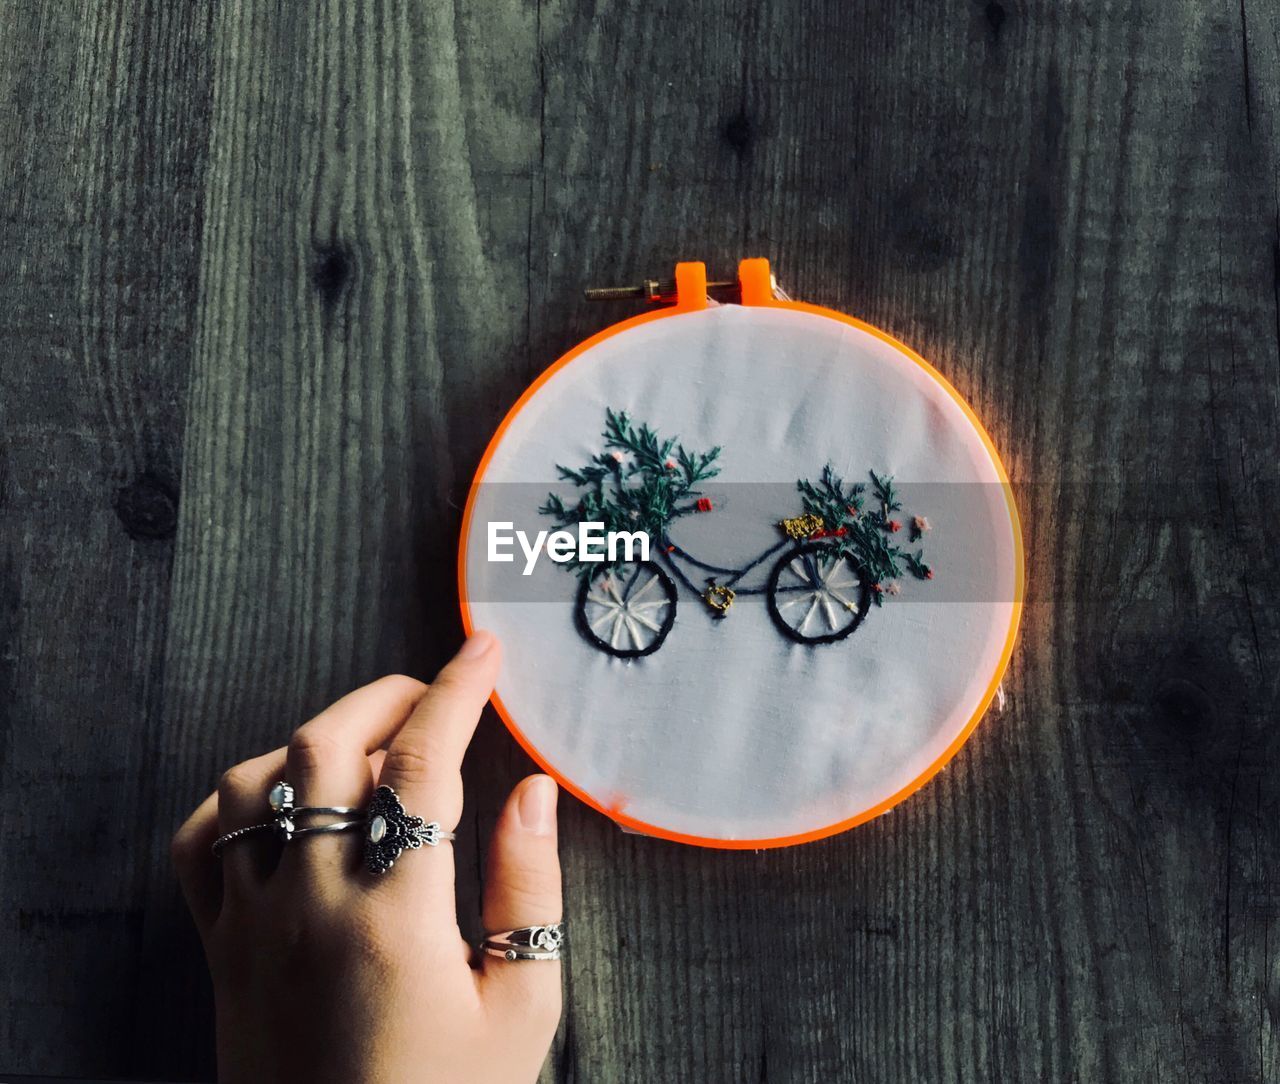 Cropped hand holding embroidery ring with bicycle design on fabric